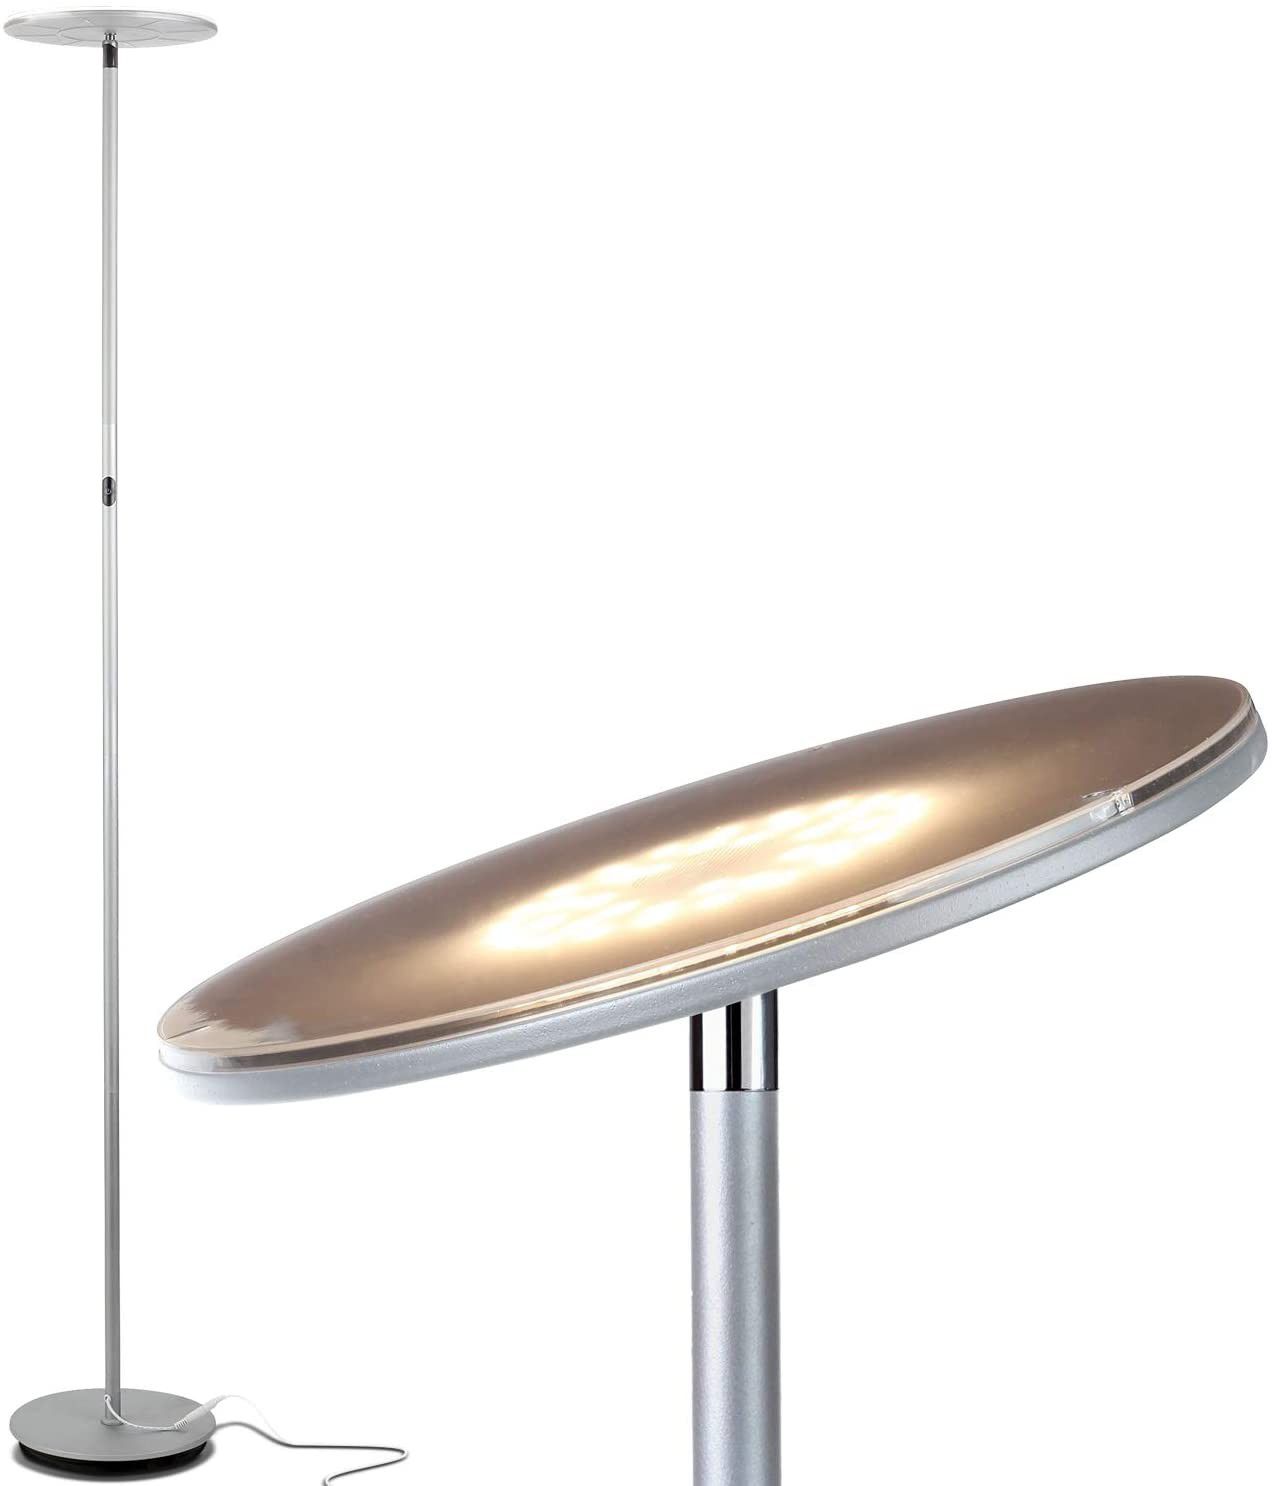 Brightech Sky LED Torchiere Floor Lamp - Platinum Silver